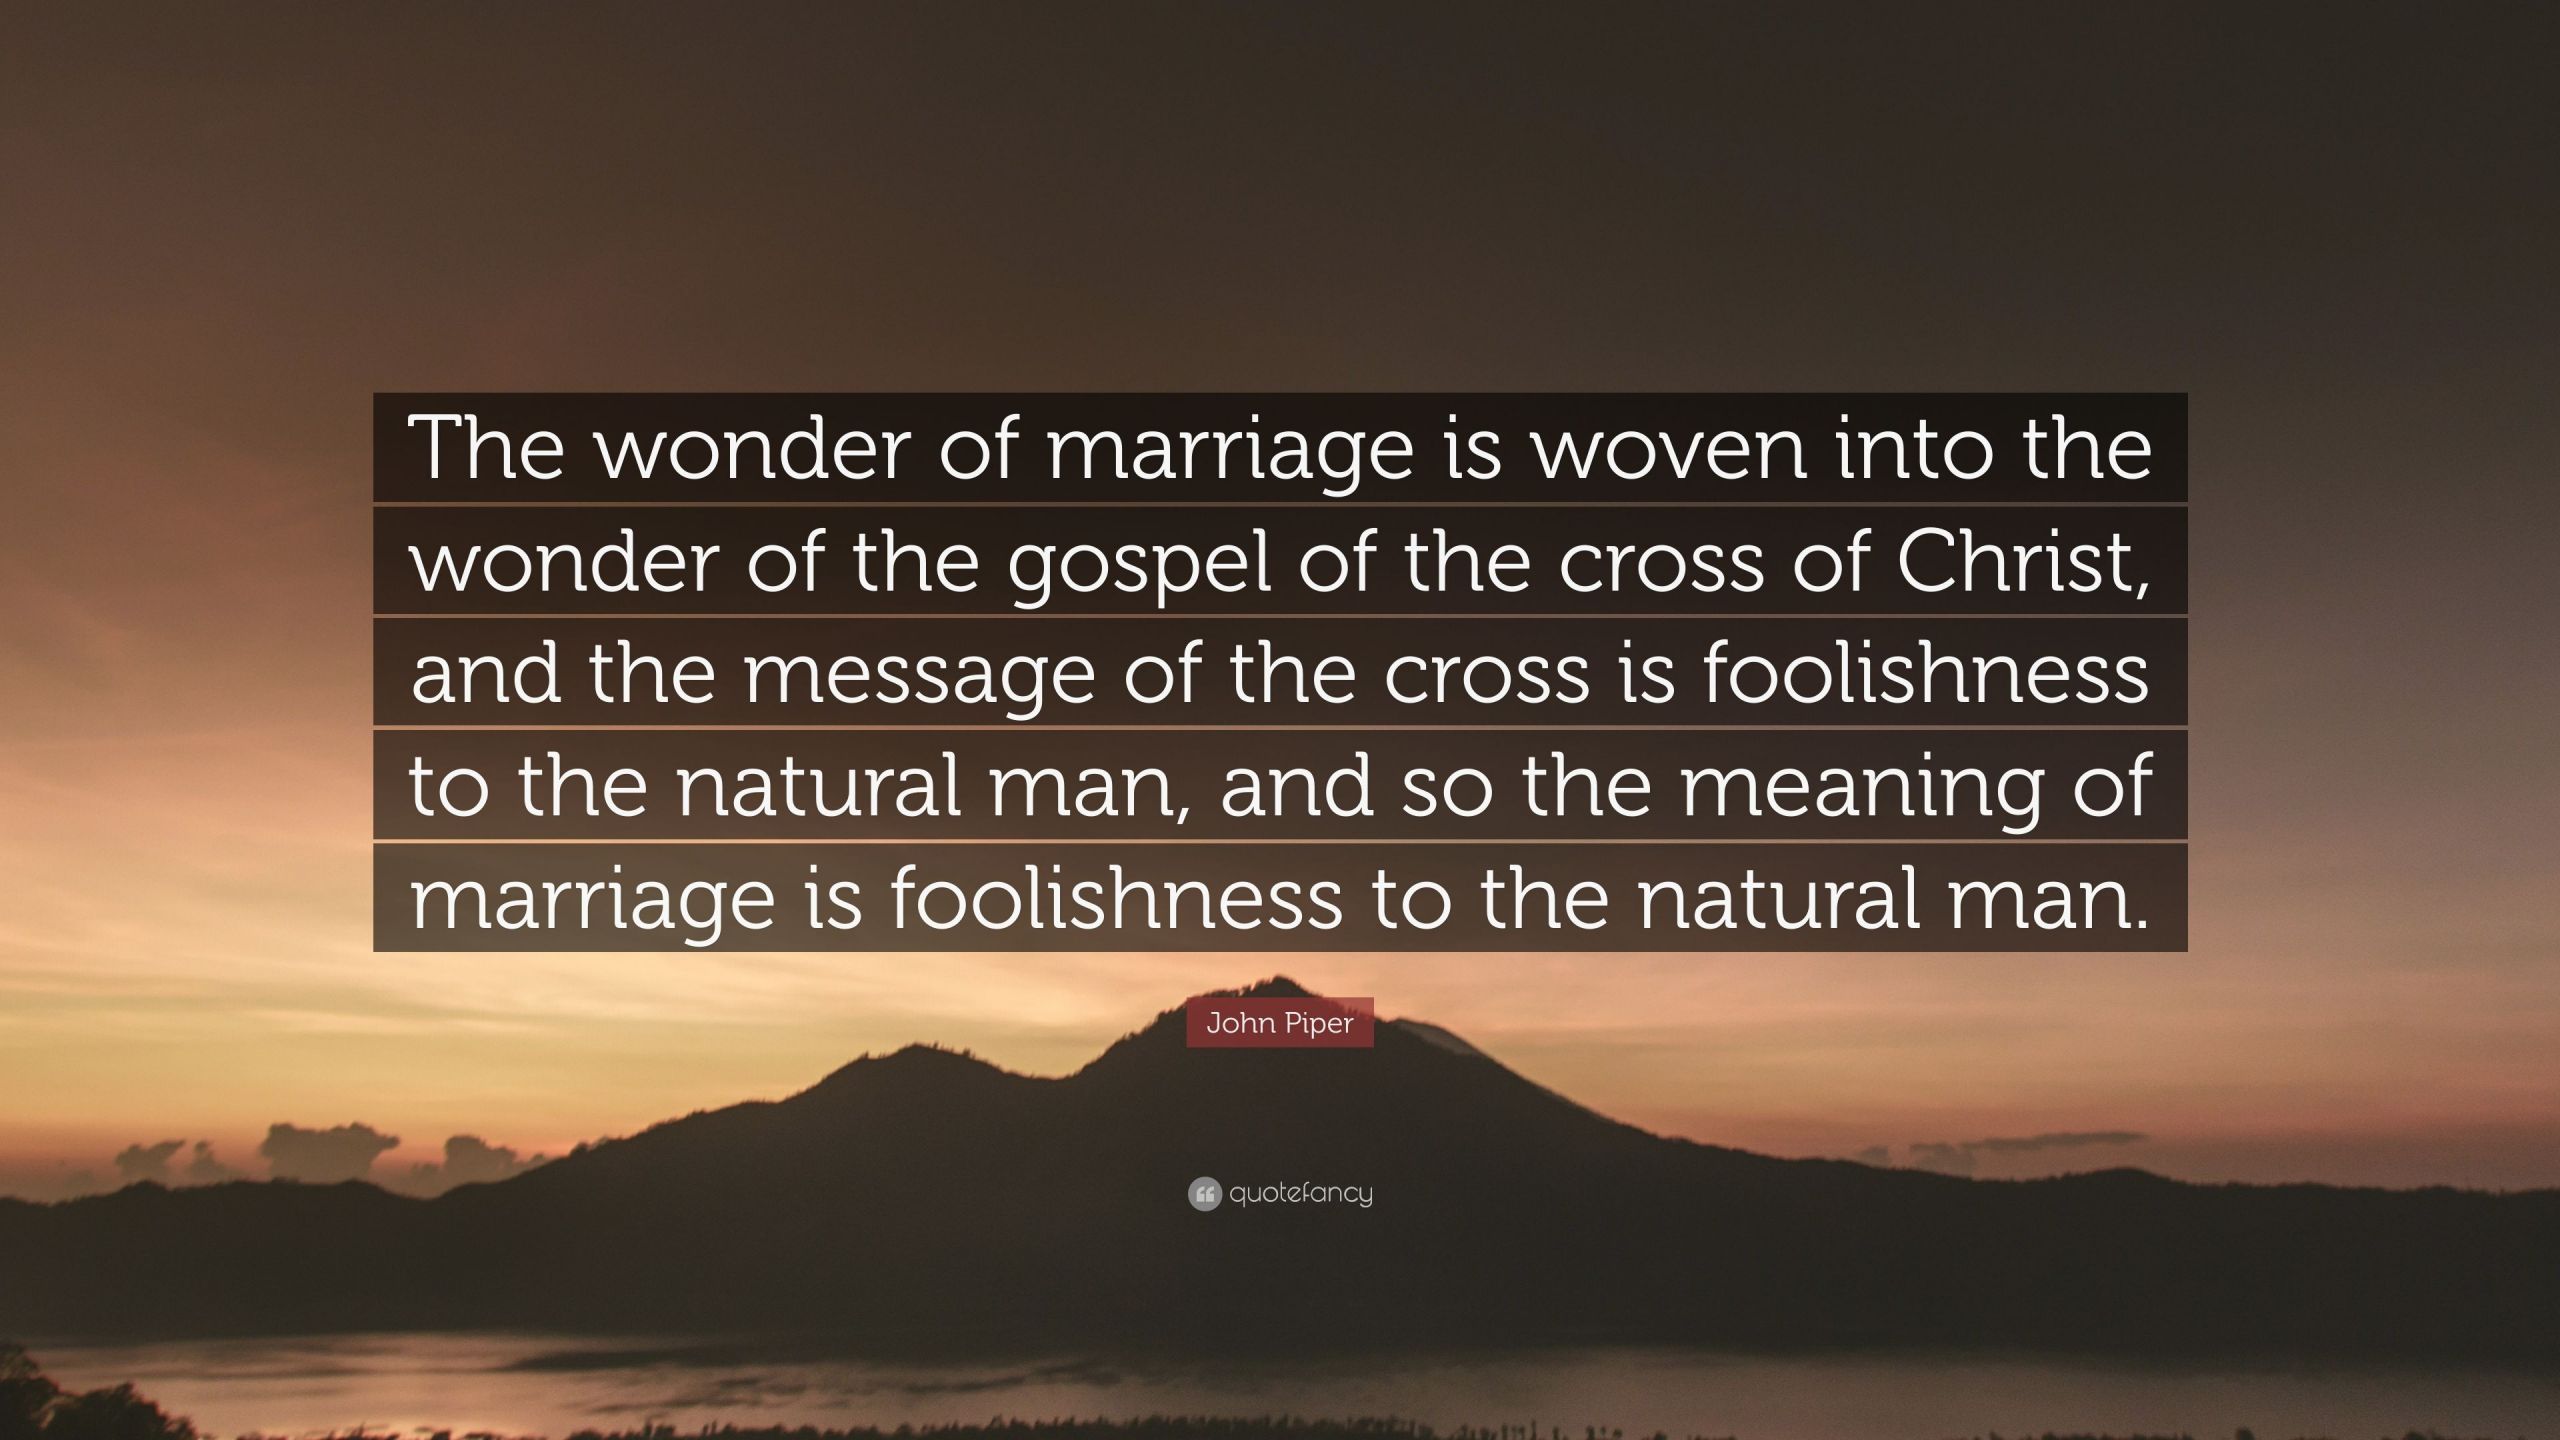 John Piper Marriage Quote
 John Piper Quote “The wonder of marriage is woven into